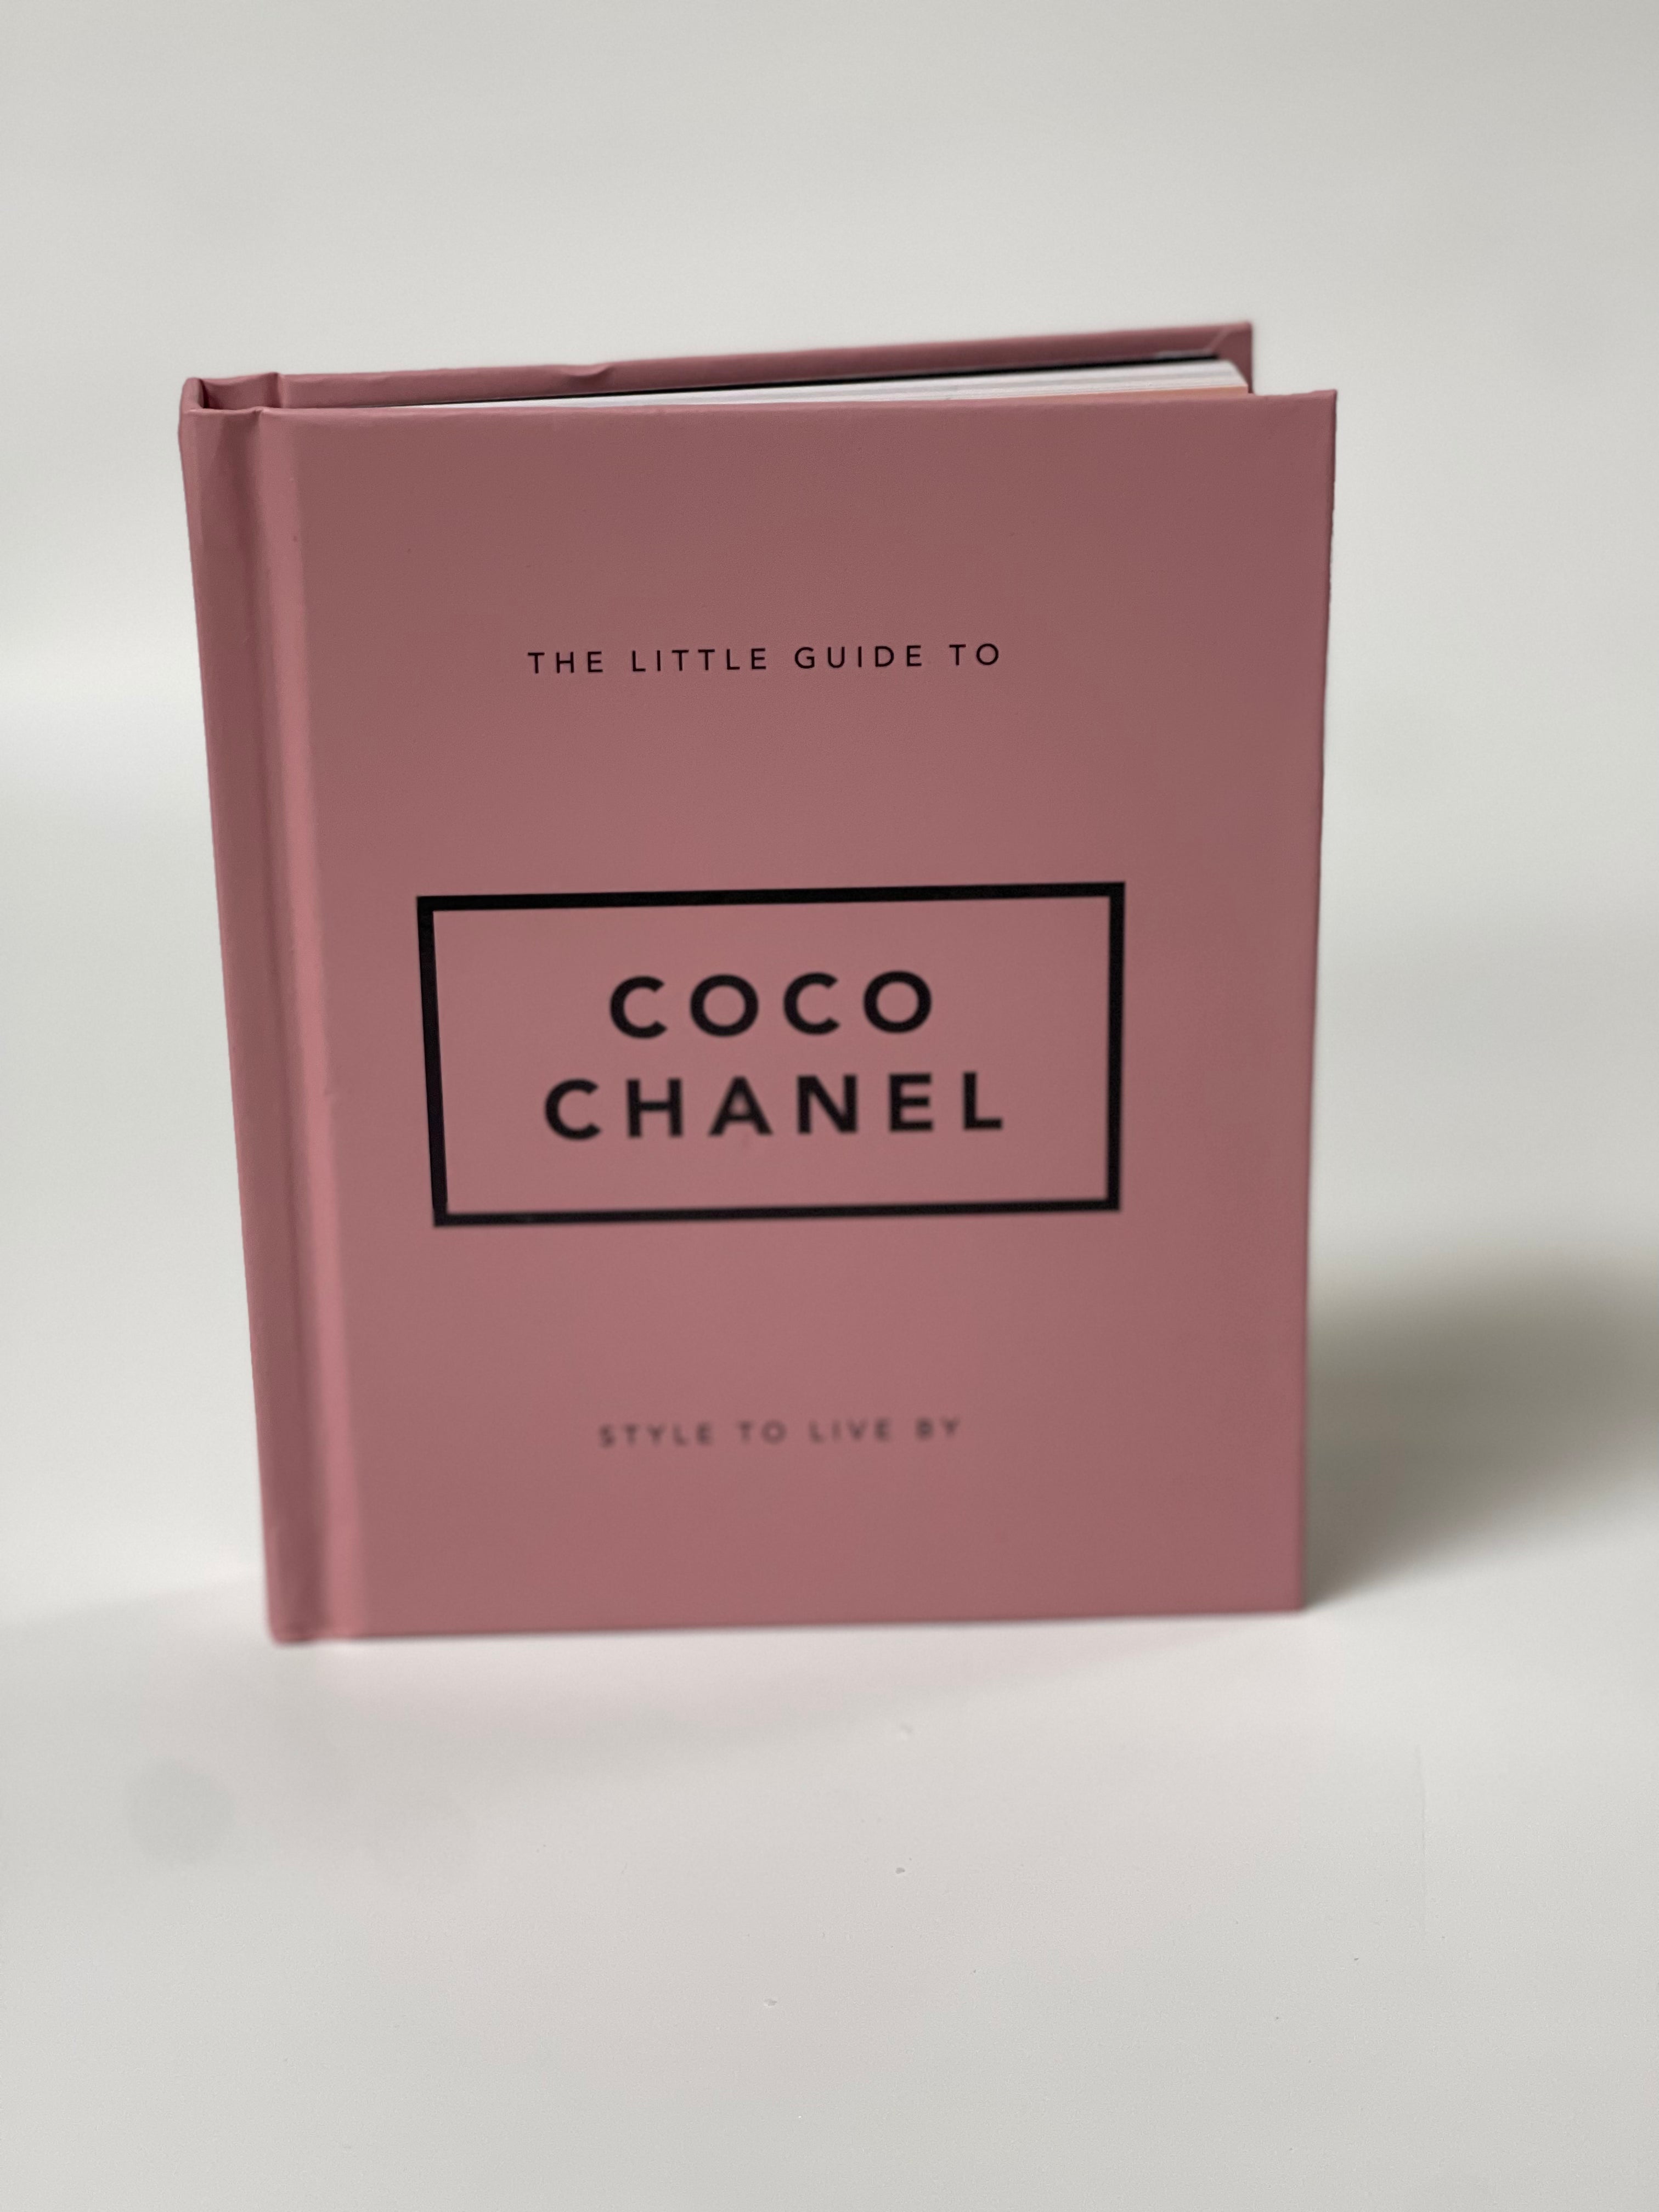 Köp The Little Guide To Coco Chanel från New Mags